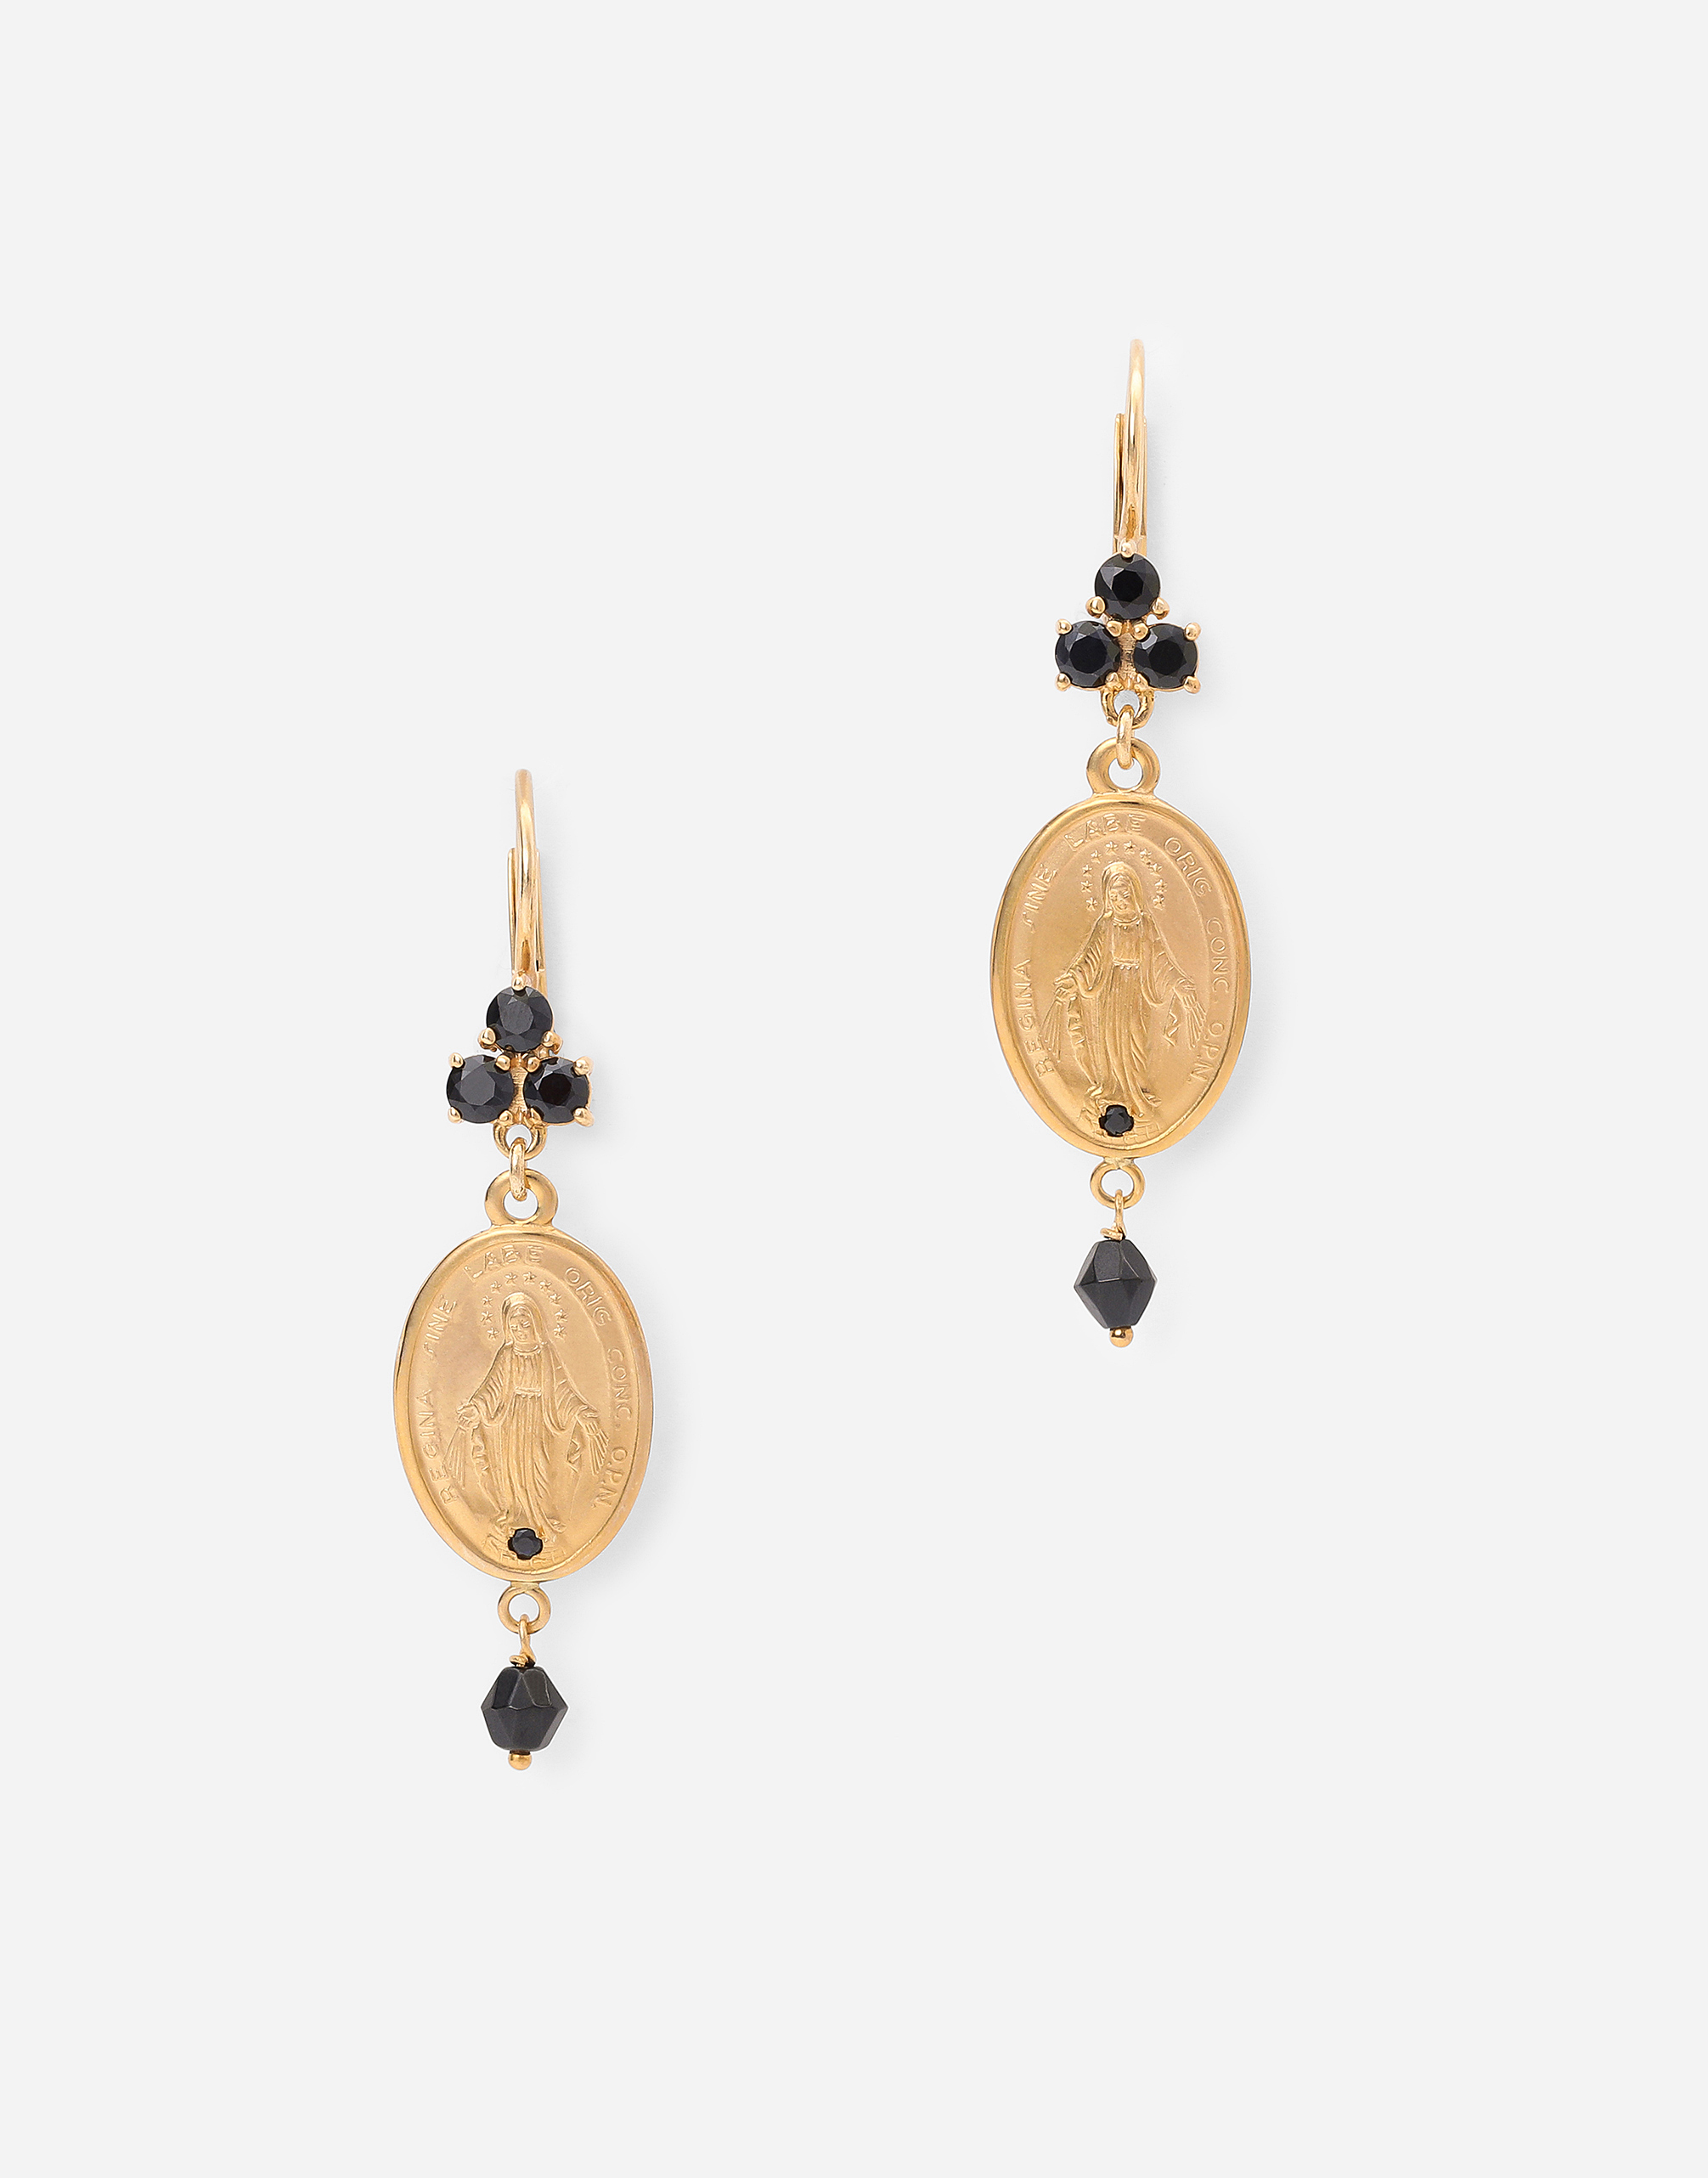 Tradition earrings in yellow 18kt gold with medals in Gold